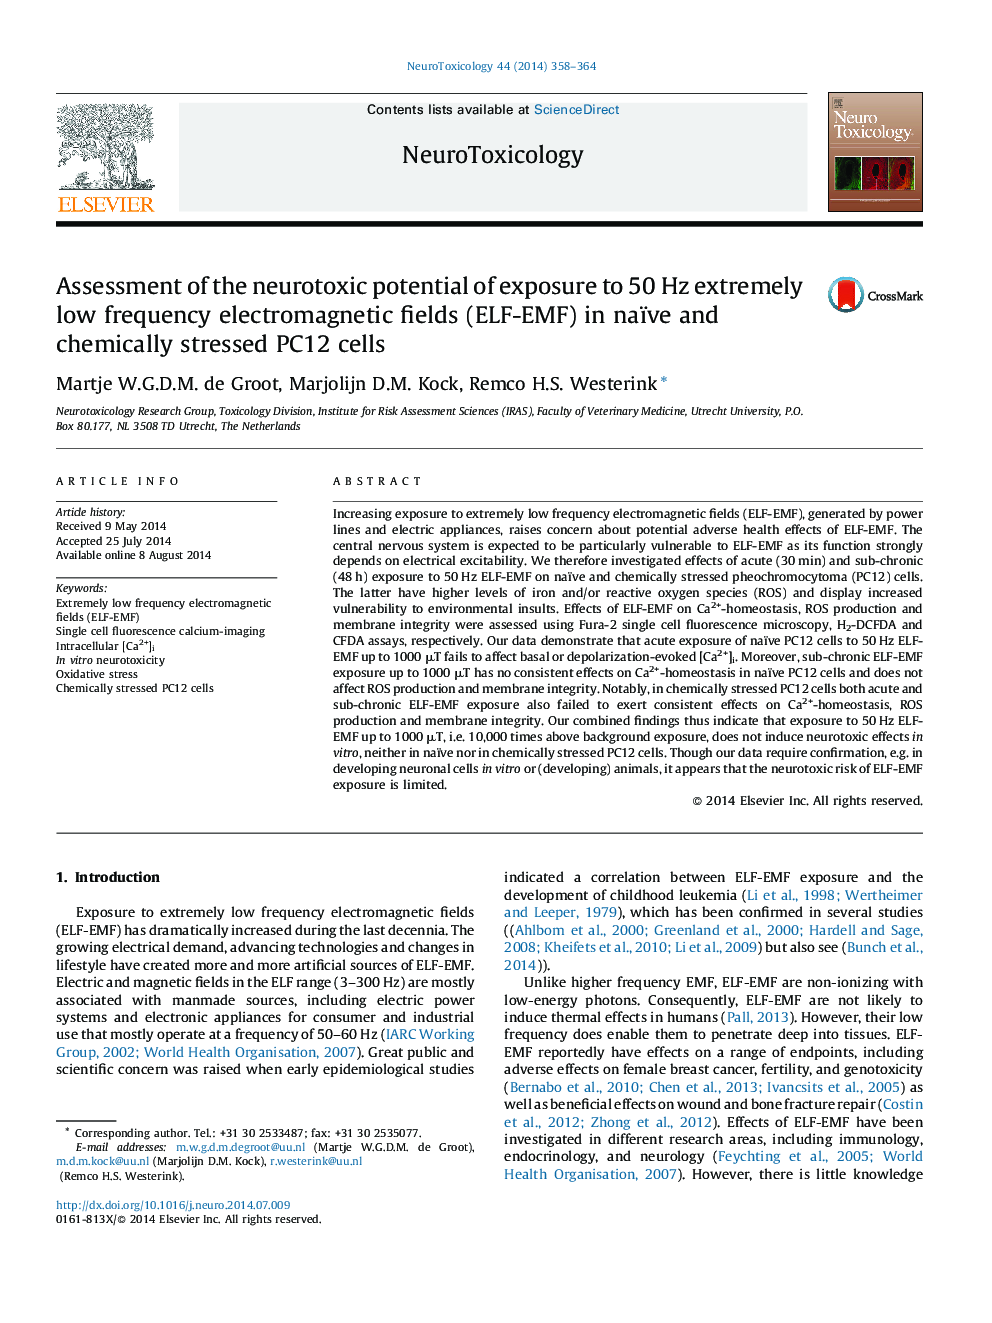 Assessment of the neurotoxic potential of exposure to 50 Hz extremely low frequency electromagnetic fields (ELF-EMF) in naïve and chemically stressed PC12 cells